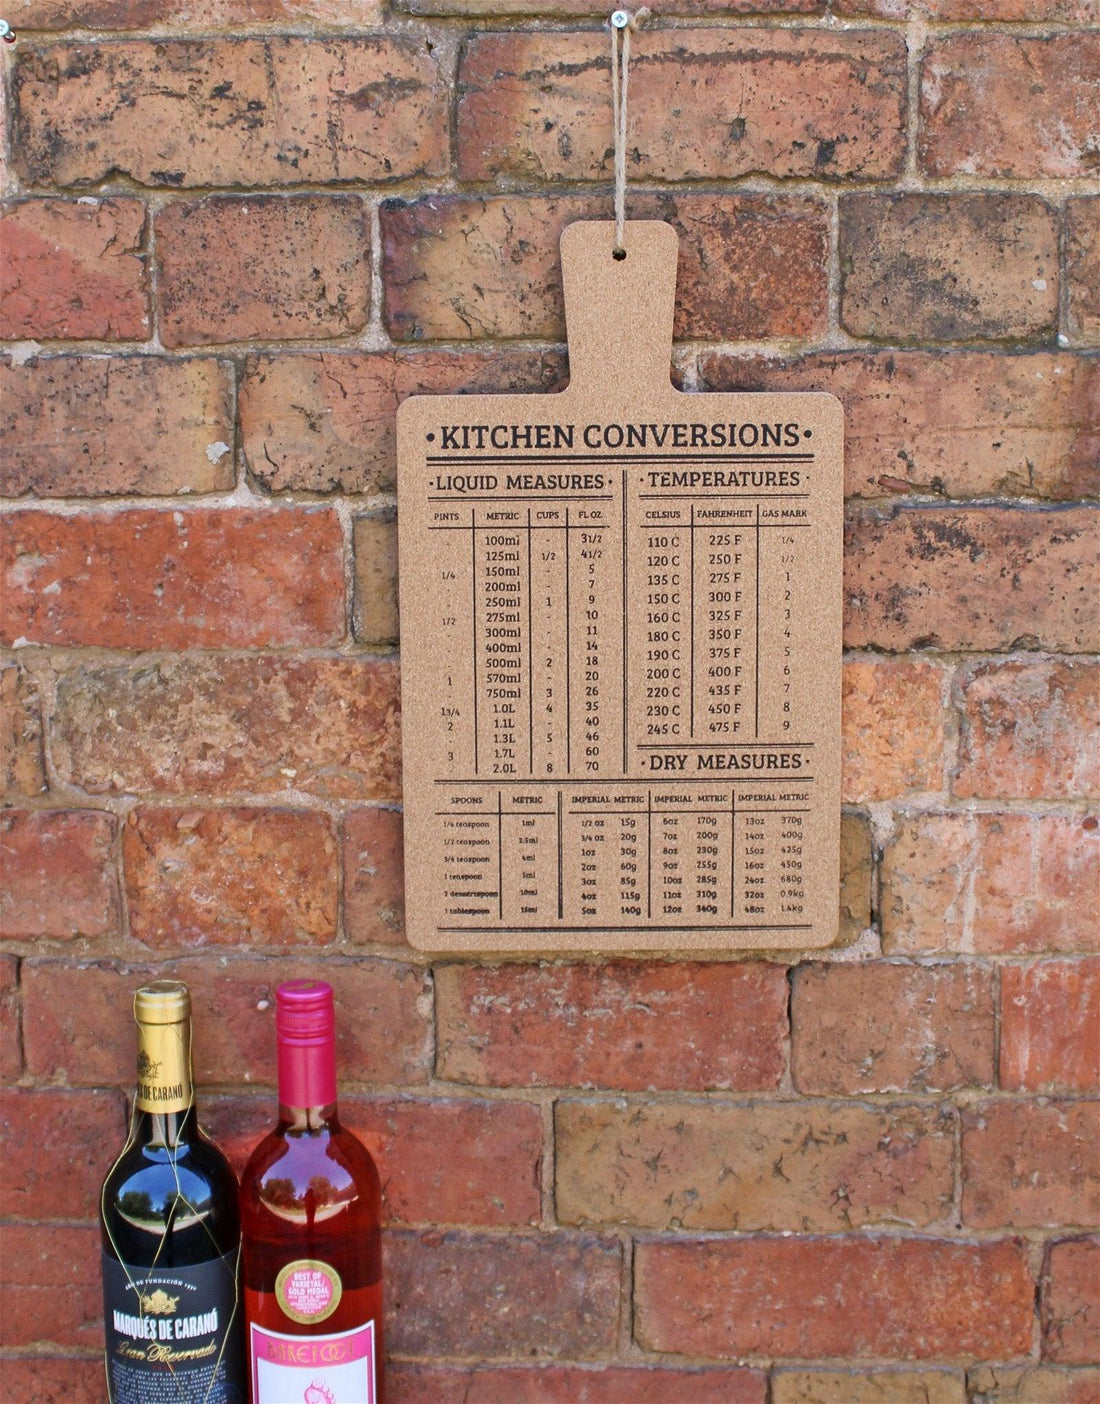 Hanging Cork Board Featuring Kitchen Conversions Chart - £15.99 - Decorative Kitchen Items 